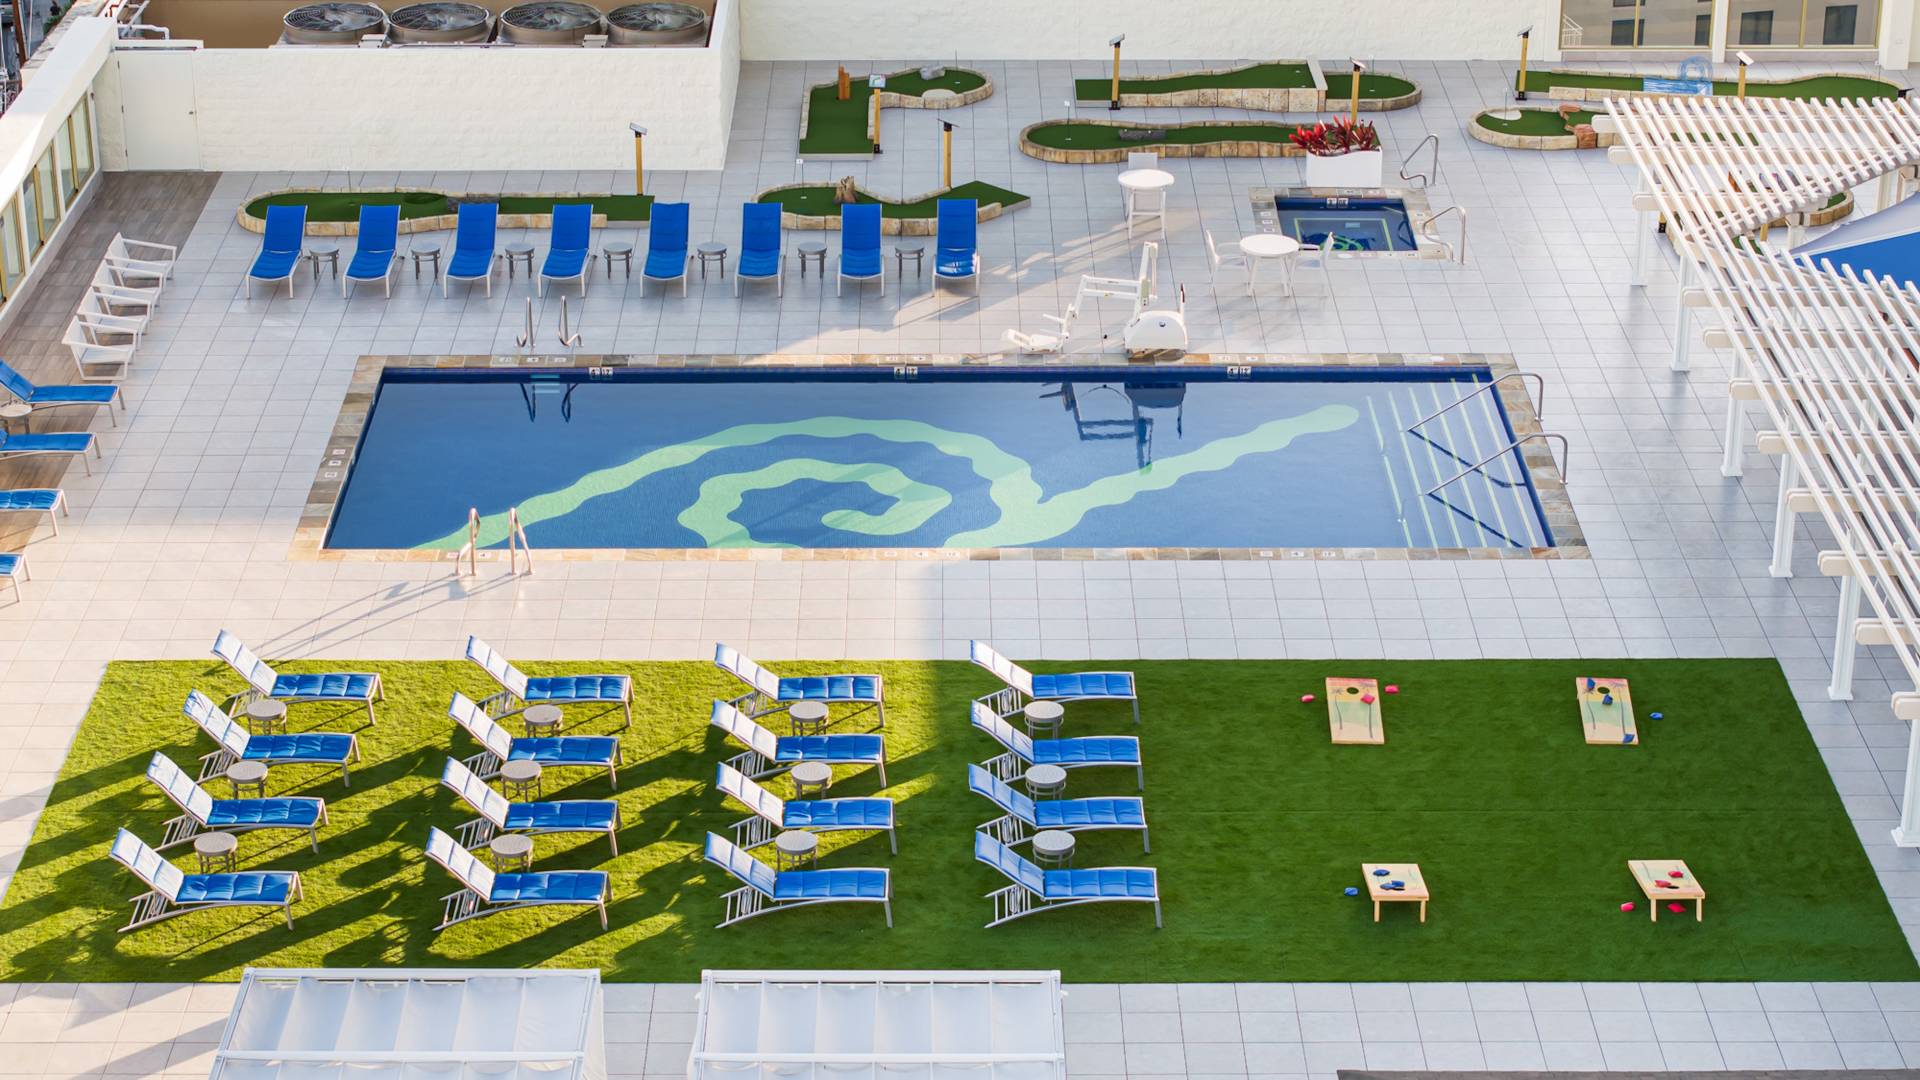 Pool with lounger from aerial view